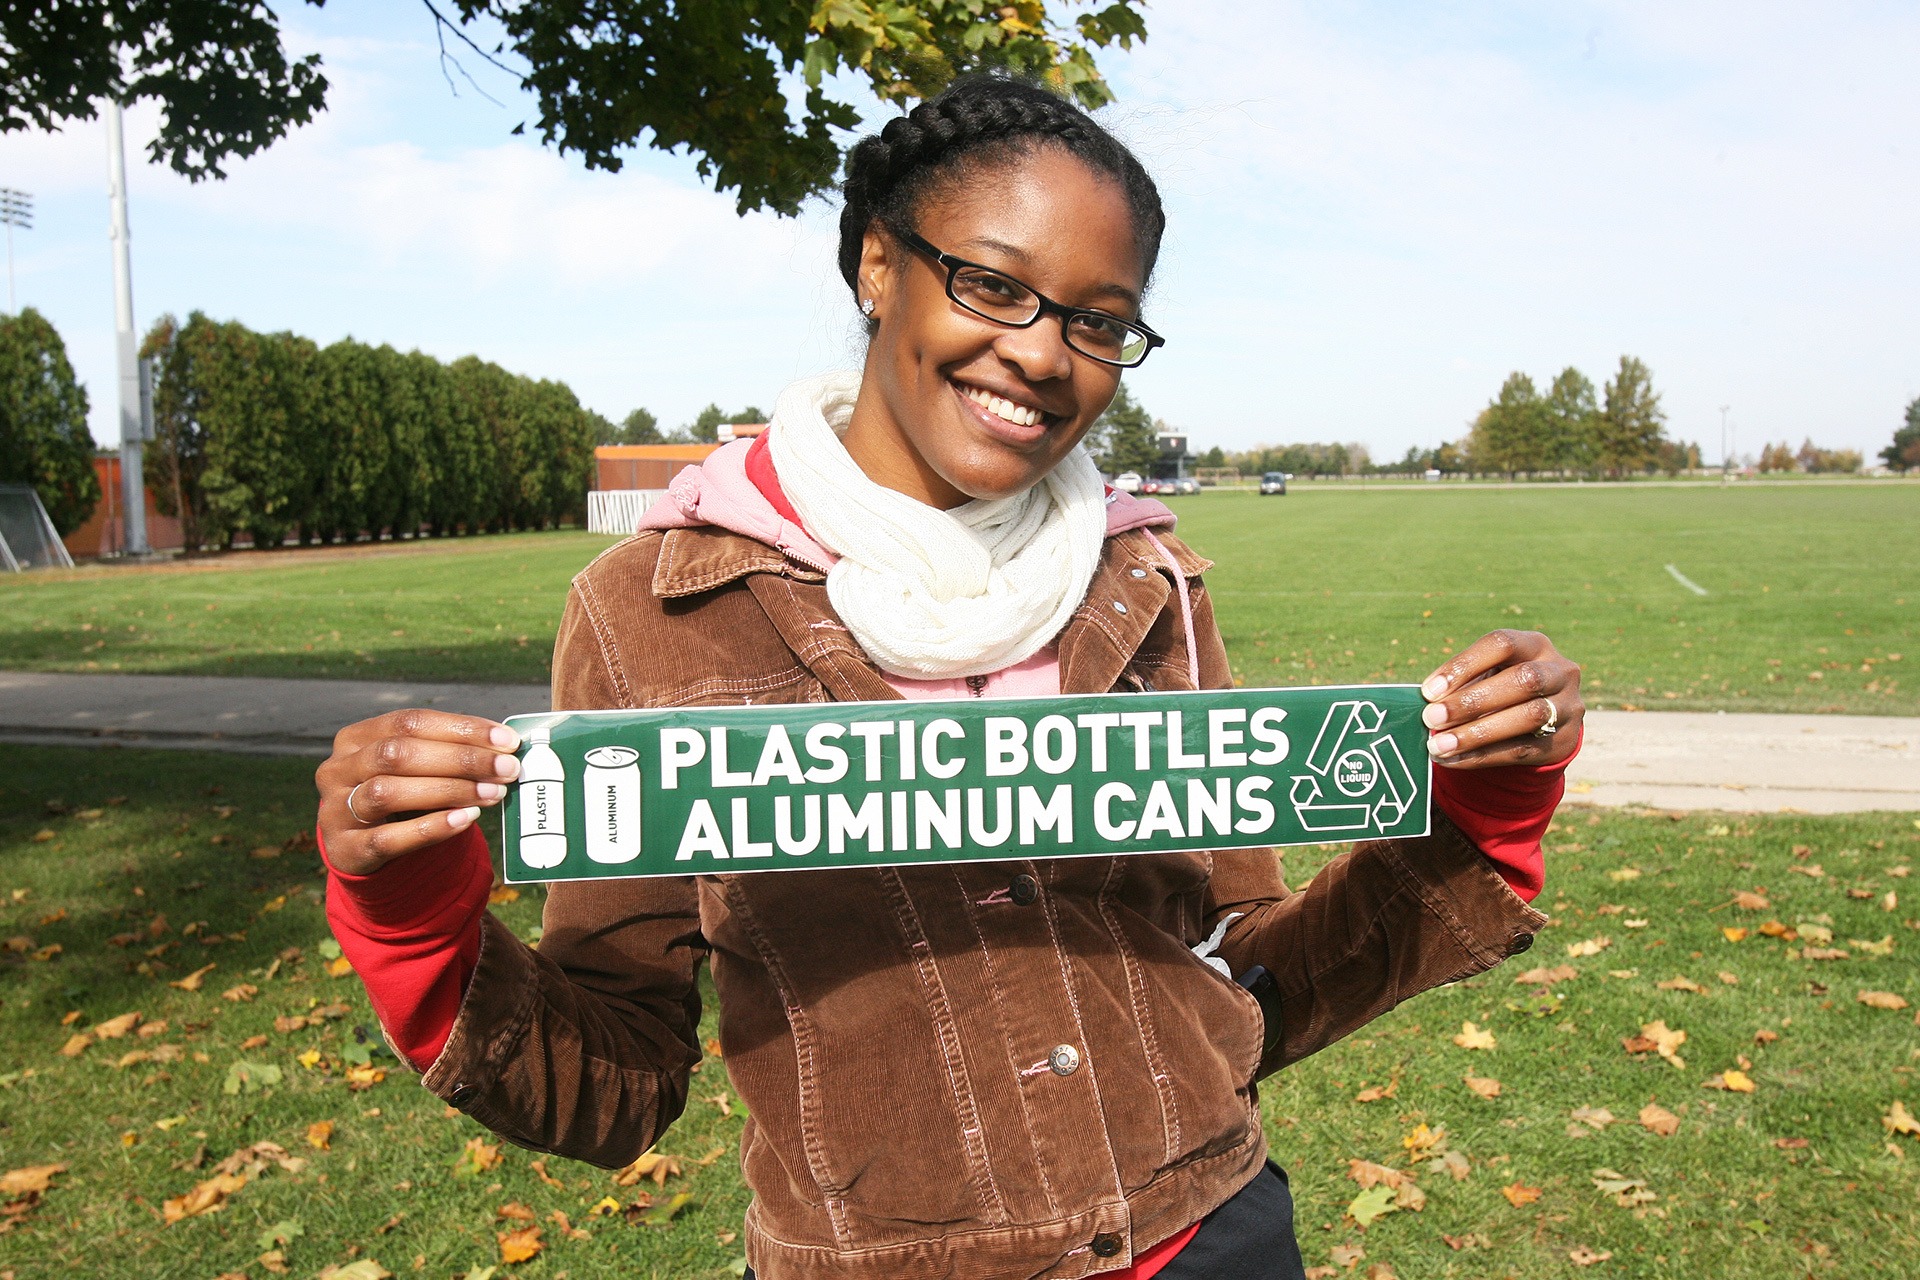 Student holding recycling sign